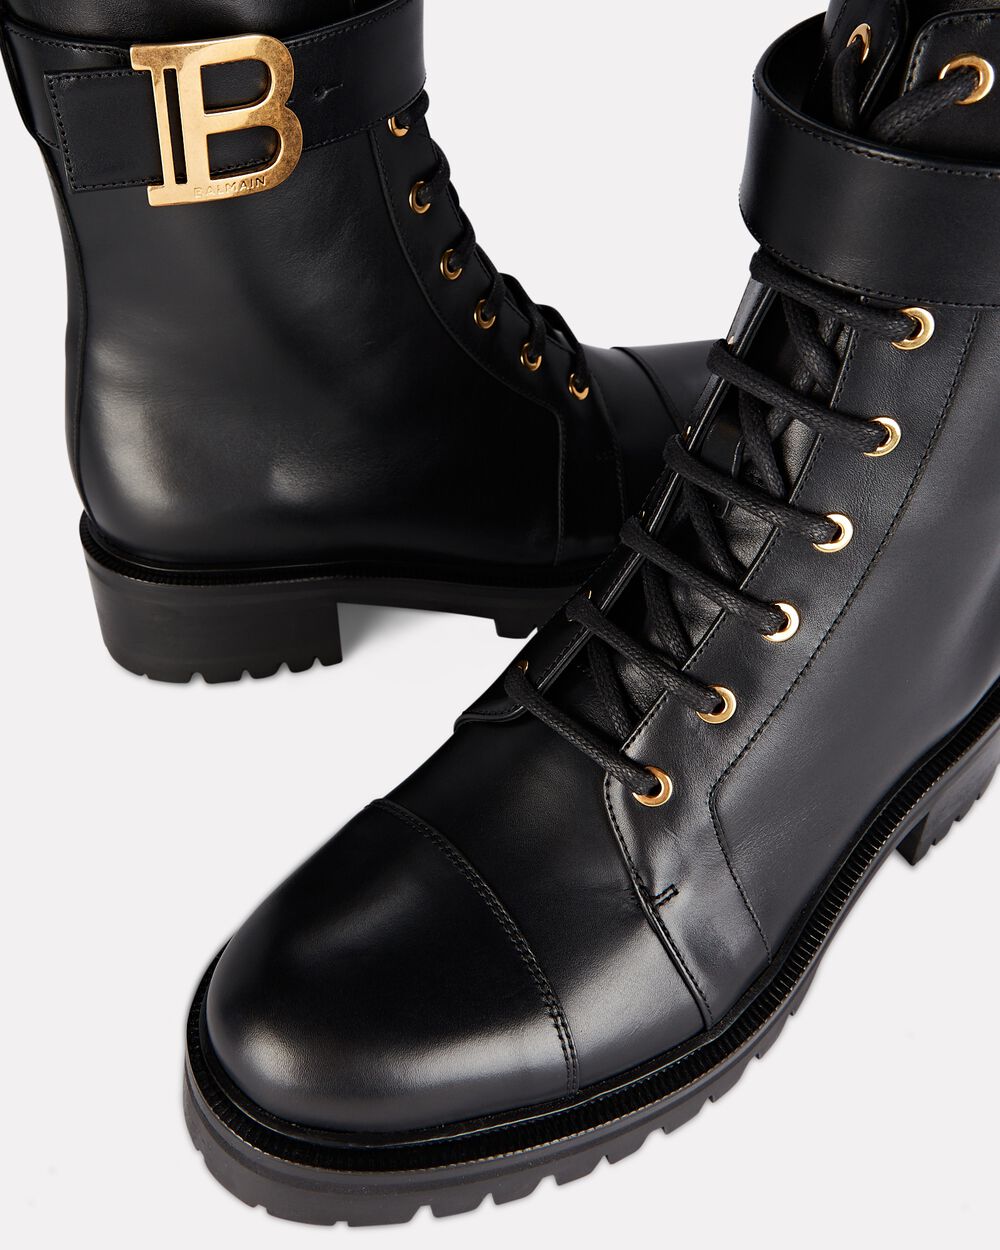 Embracing the Military Luxe: Balmain's Ranger Quilted Leather Combat Boots